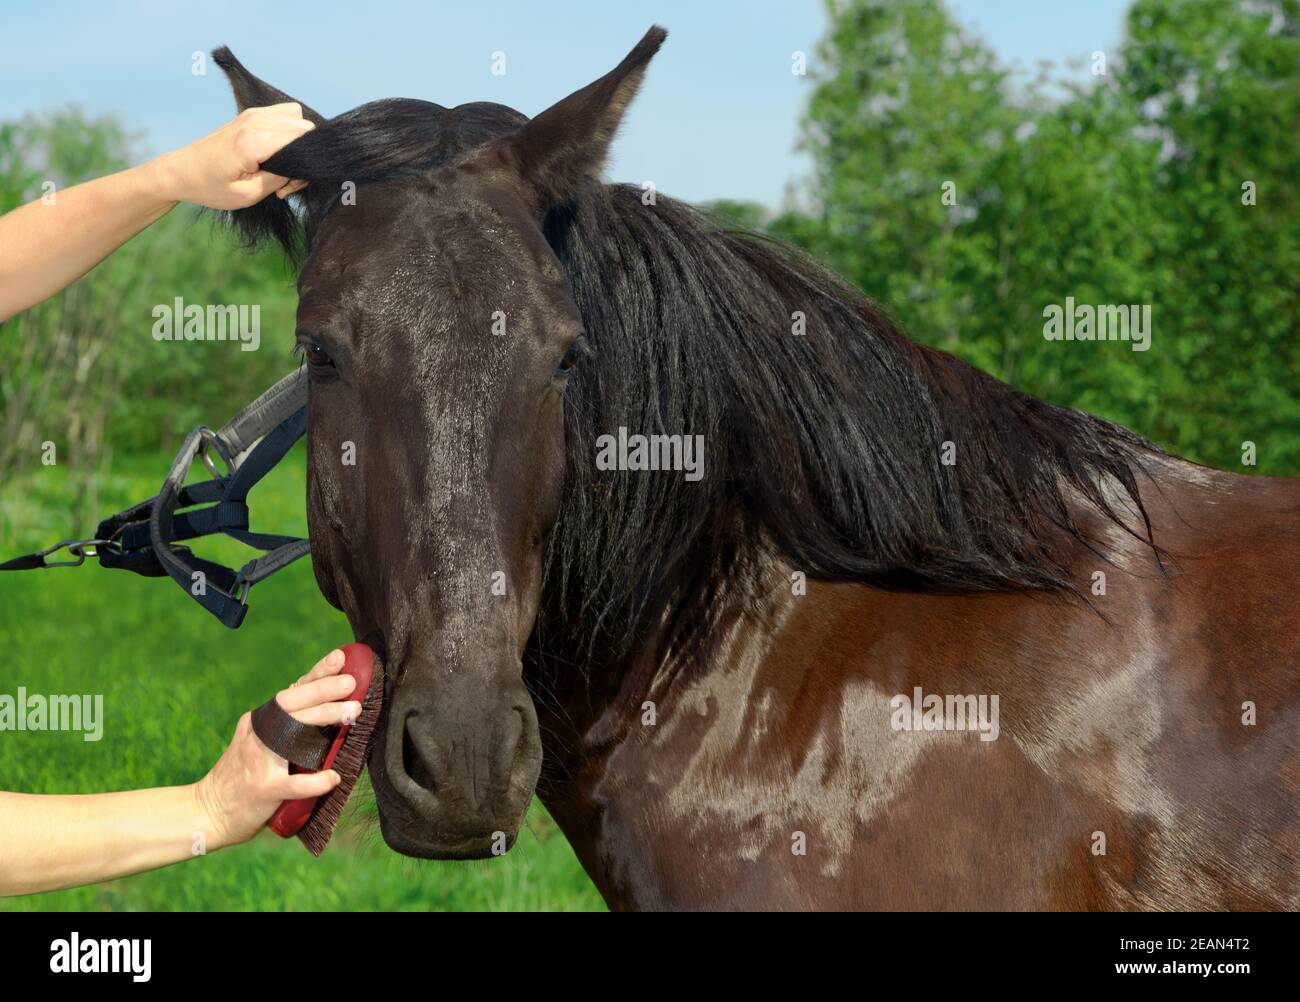 The Caucasian woman is holding the red body brush in her hand and grooming the coat of her horse in outdoors. Stock Photo